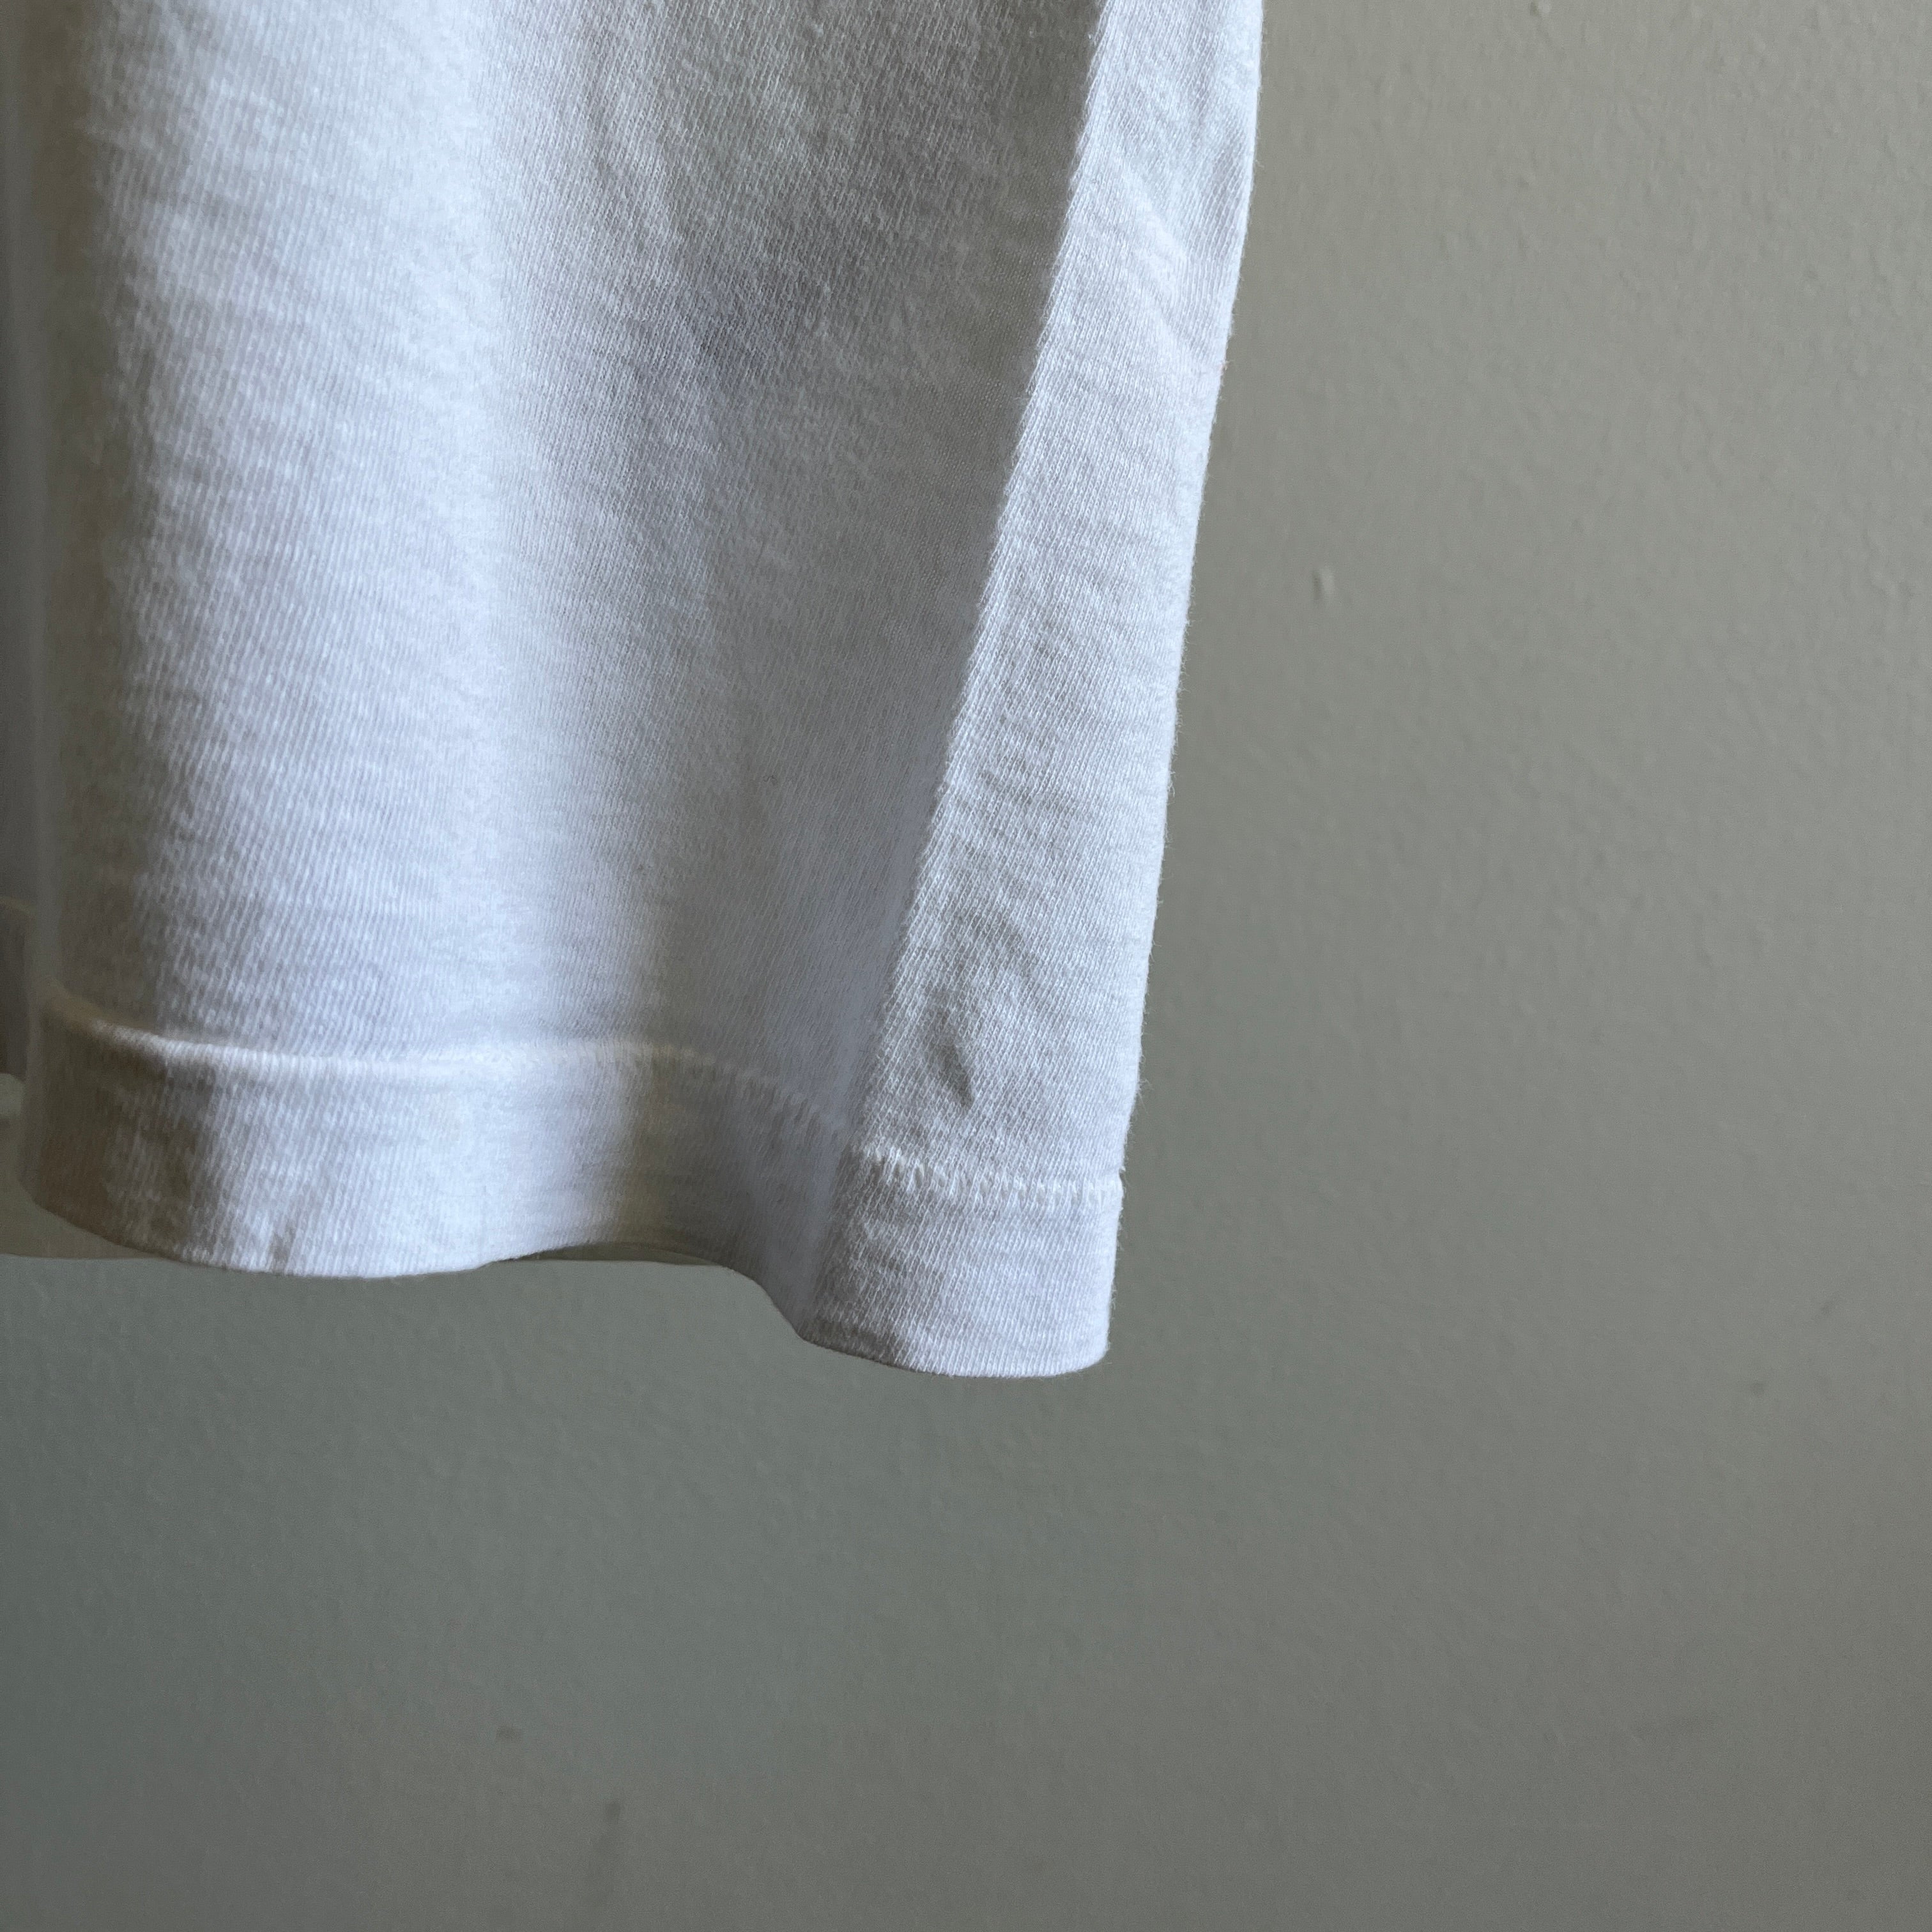 1980s Blank White T-Shirt with Gash